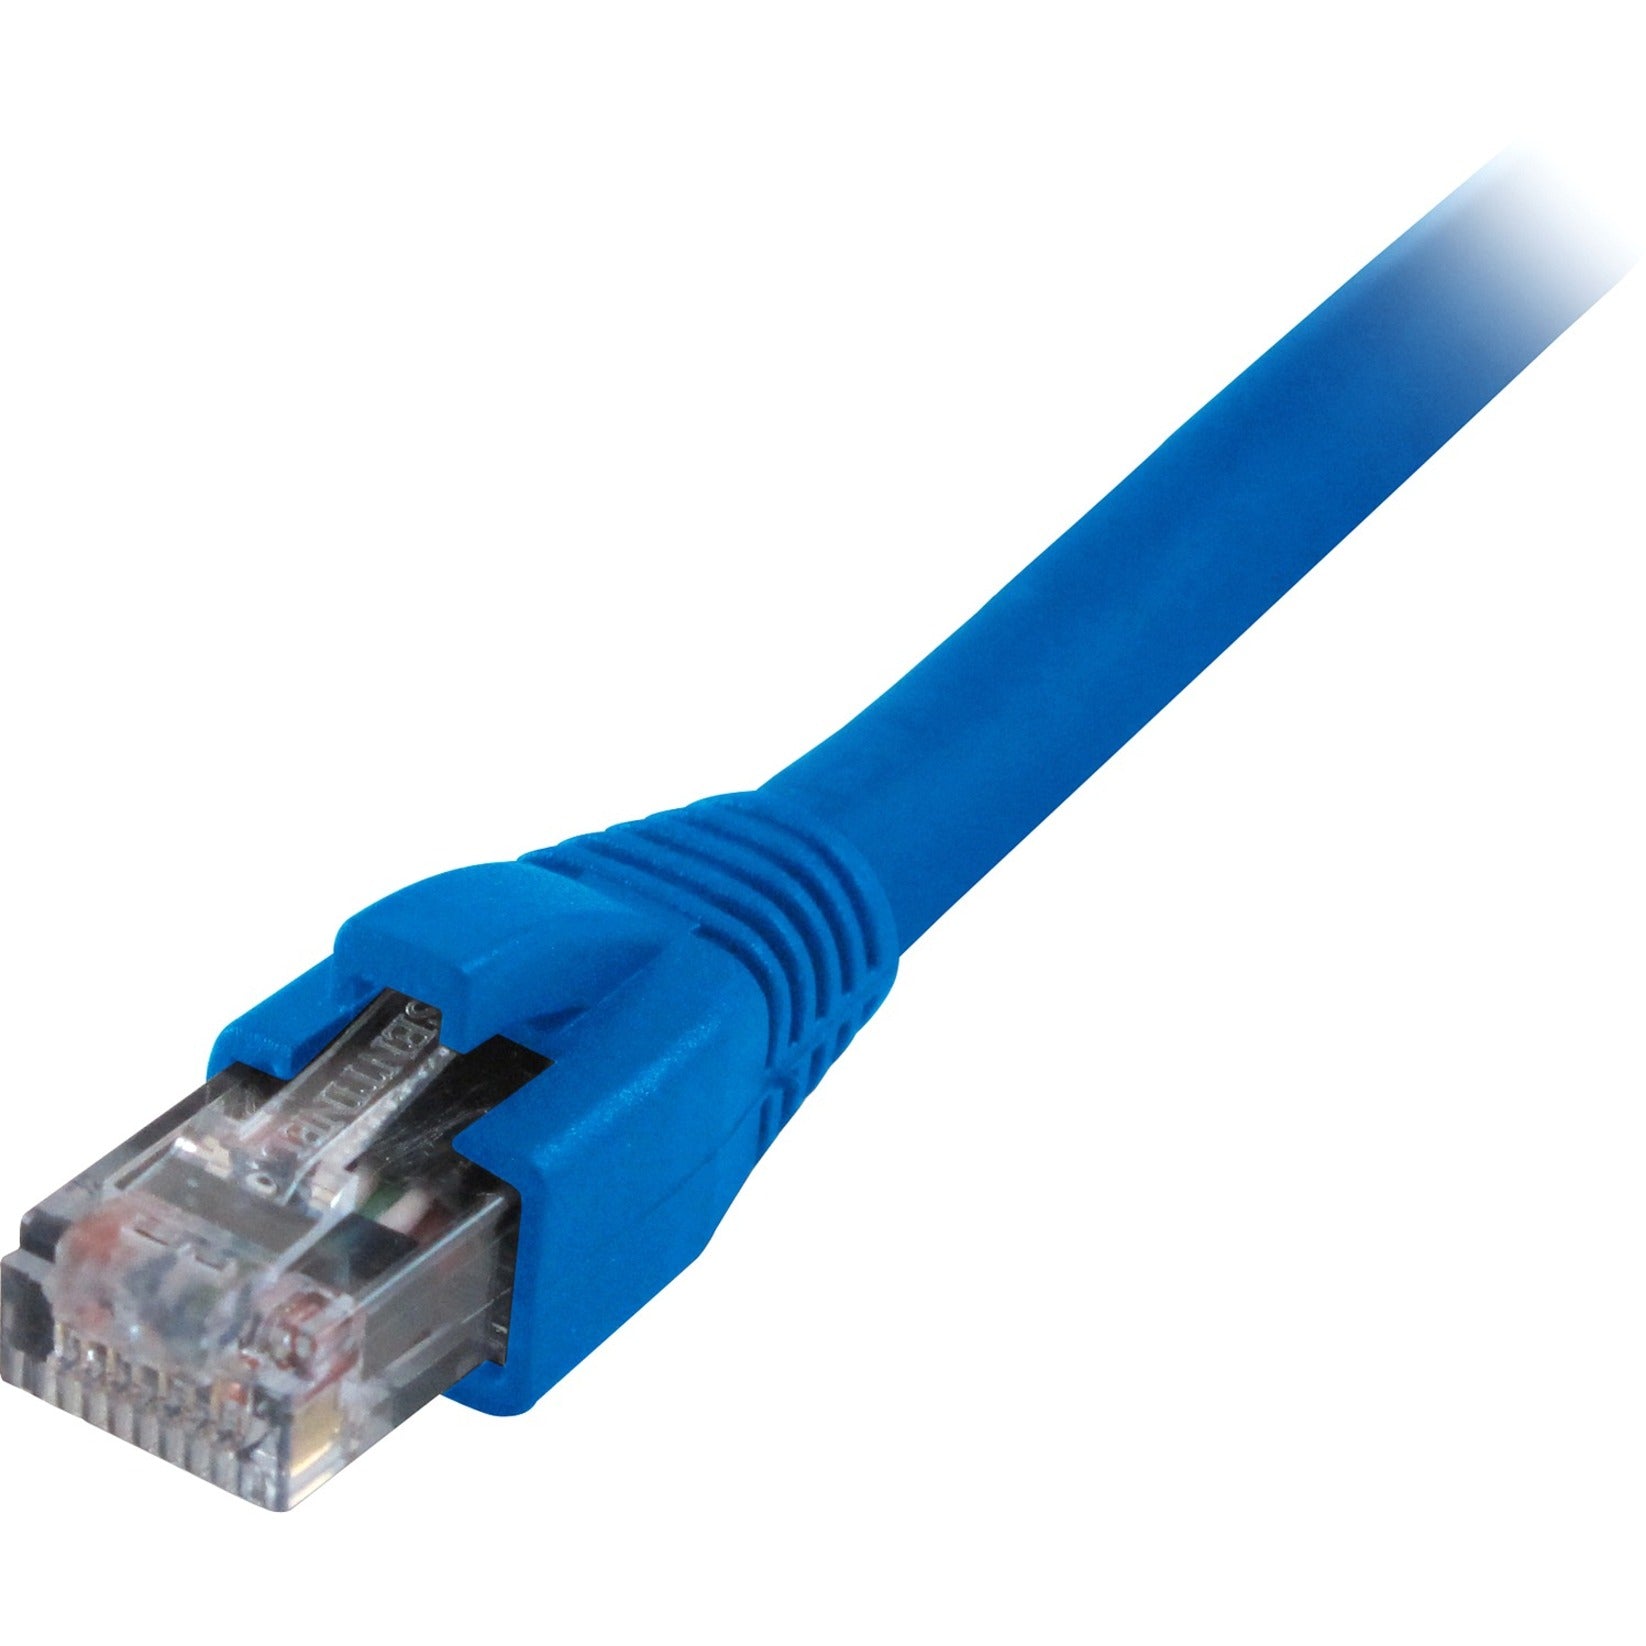 Comprehensive CAT5-350-10BLU Cat5e 350 Mhz Snagless Patch Cable 10ft Blue, Molded, Strain Relief, 1 Gbit/s Data Transfer Rate